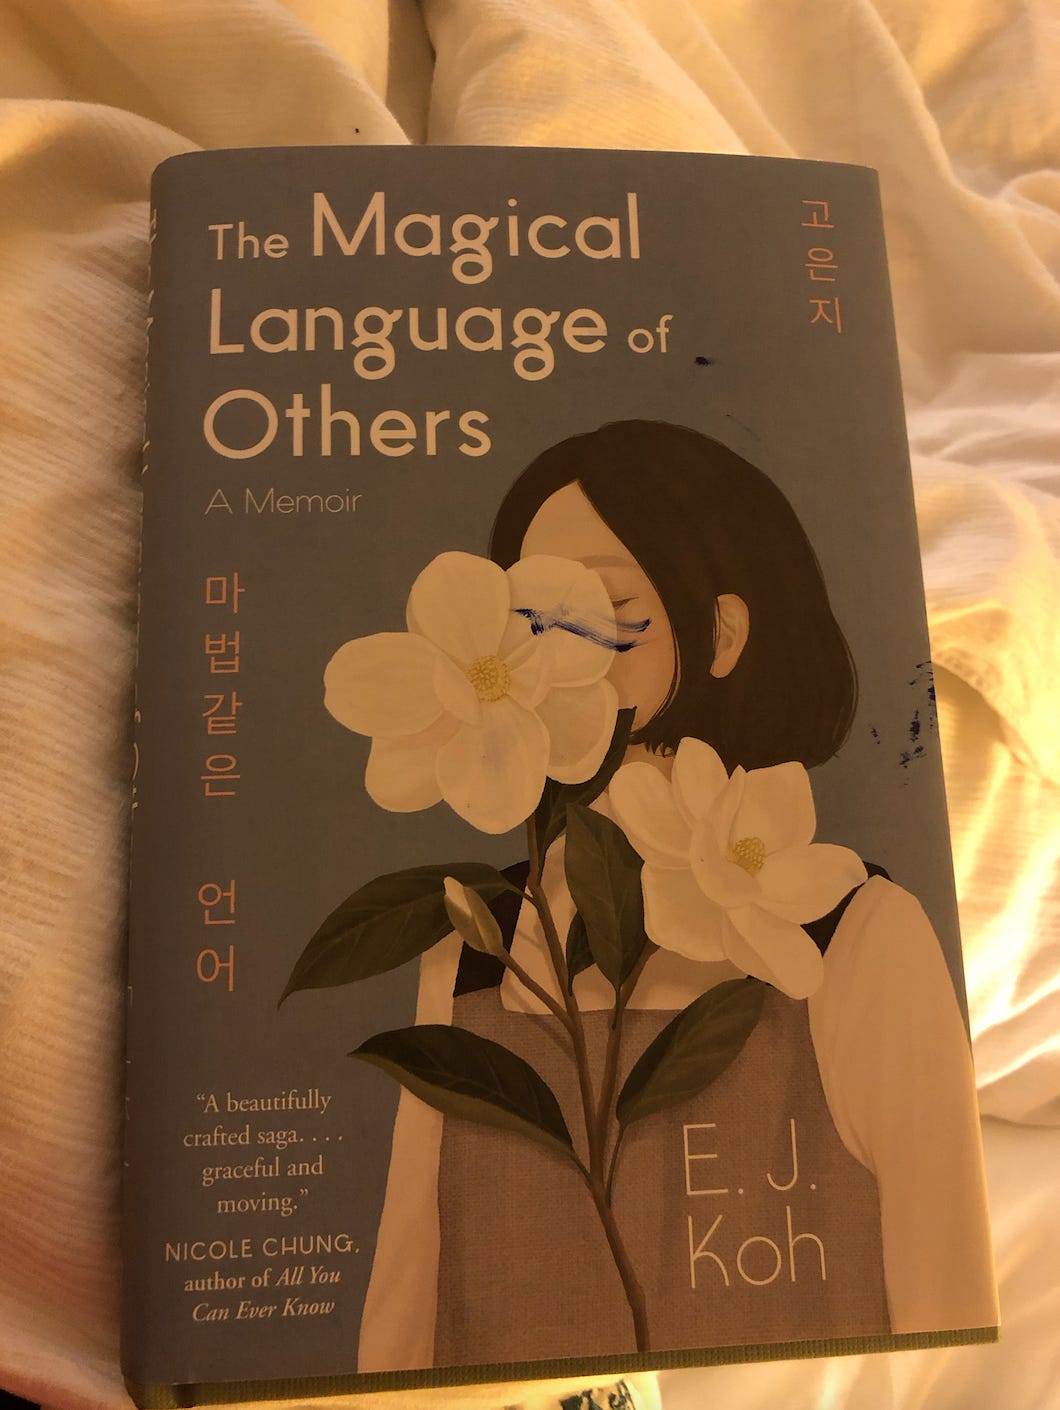 A photo of Kat’s copy of The Magical Language of Others by E.J. Koh. The cover has a drawing of a woman whose face is obscured by a beautiful white flower. The text has the title and author’s name written in both English and Korean.